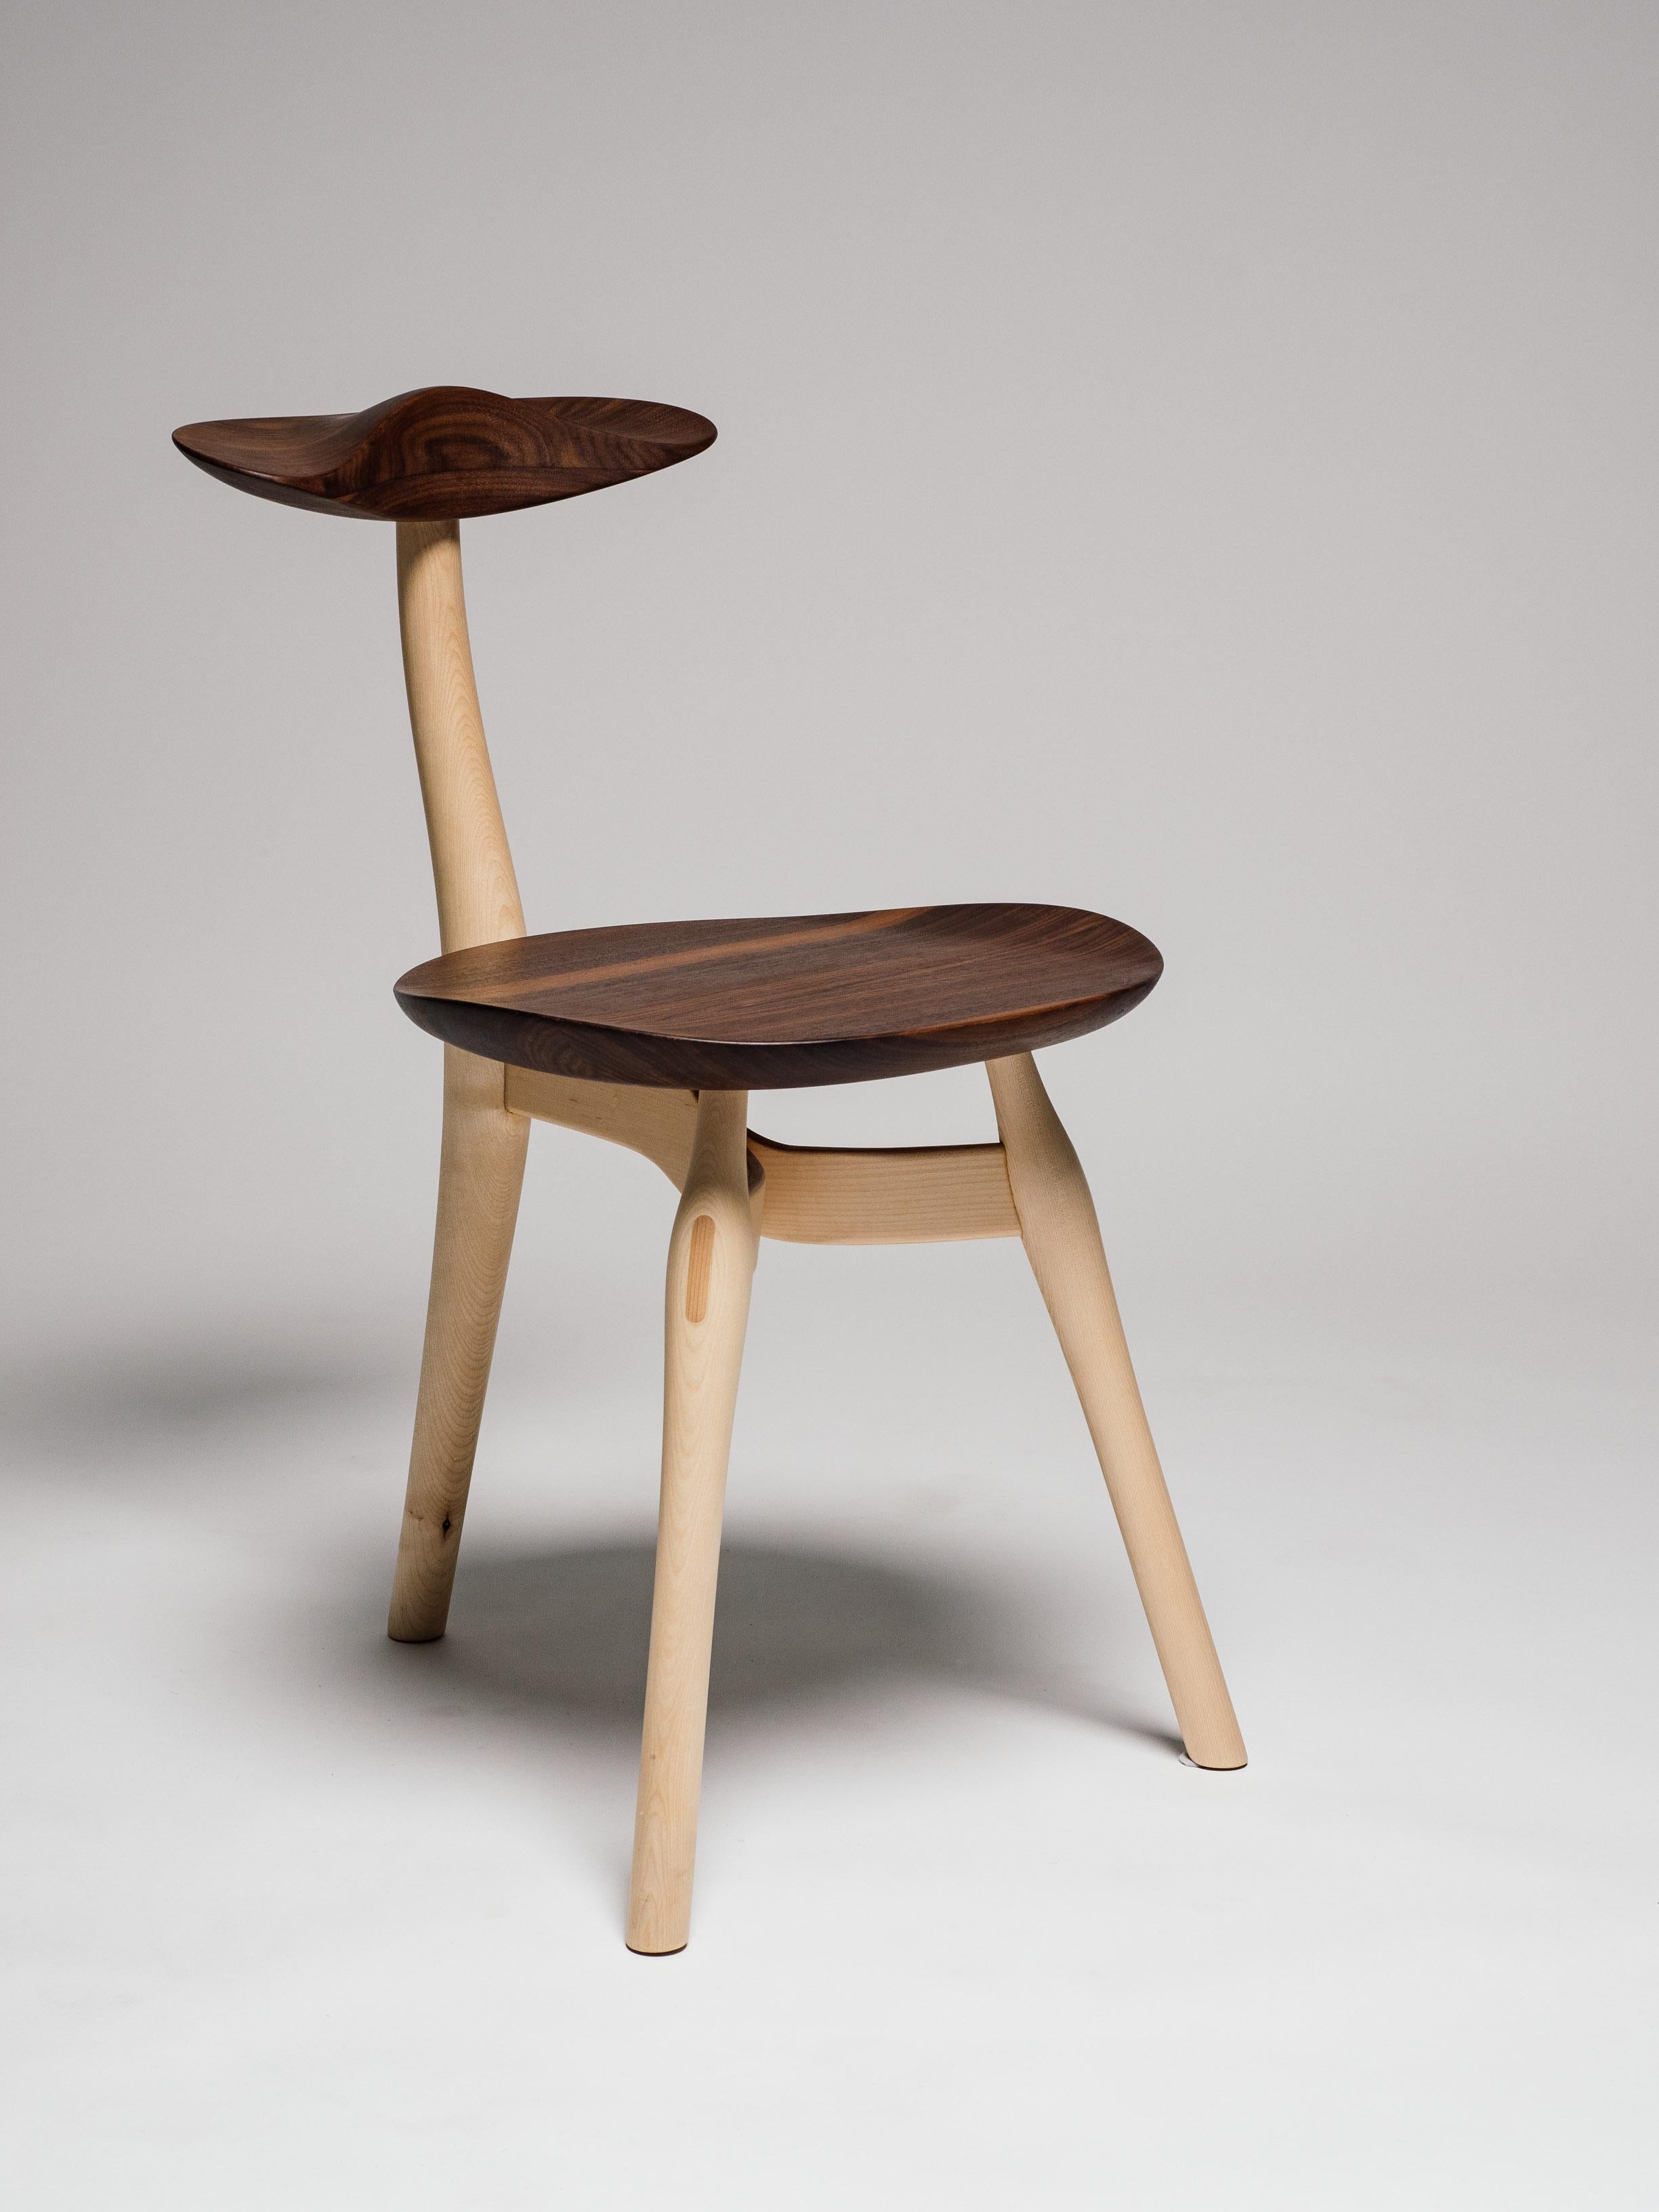 Design Philip Von Hase Ergonomic sitting sculpture chair oak and walnut. 

Phillip Von Hase is a cabinet maker educated in Hanover Germany and now located in Bergen Norway. He create furniture with a passion for wood and nature and with a